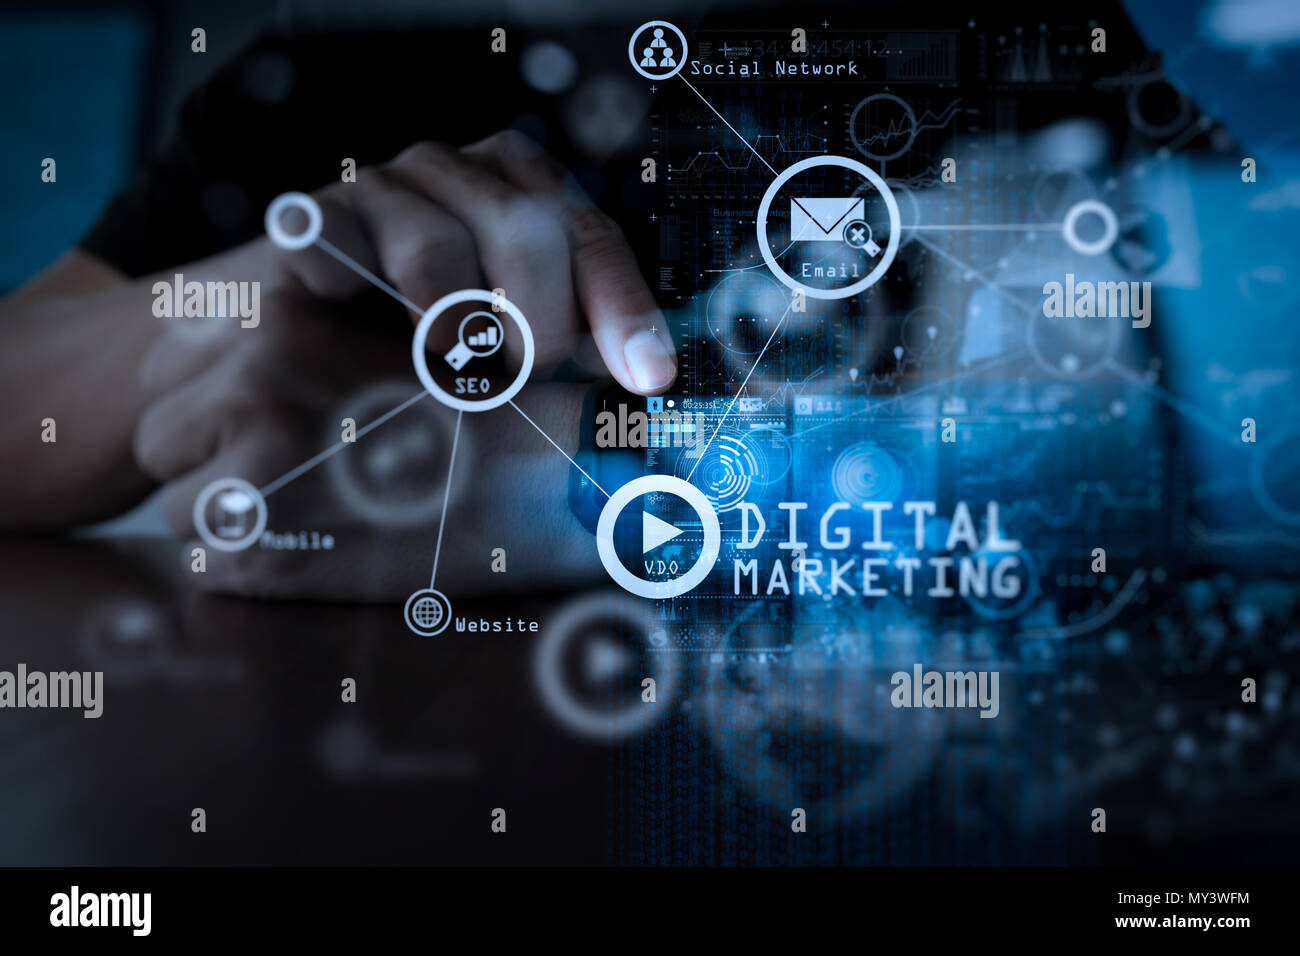 Digital marketing media (website ad, email, social network, SEO, video, mobile app) in virtual screen.Businessman hand using mobile phone with digital Stock Photo